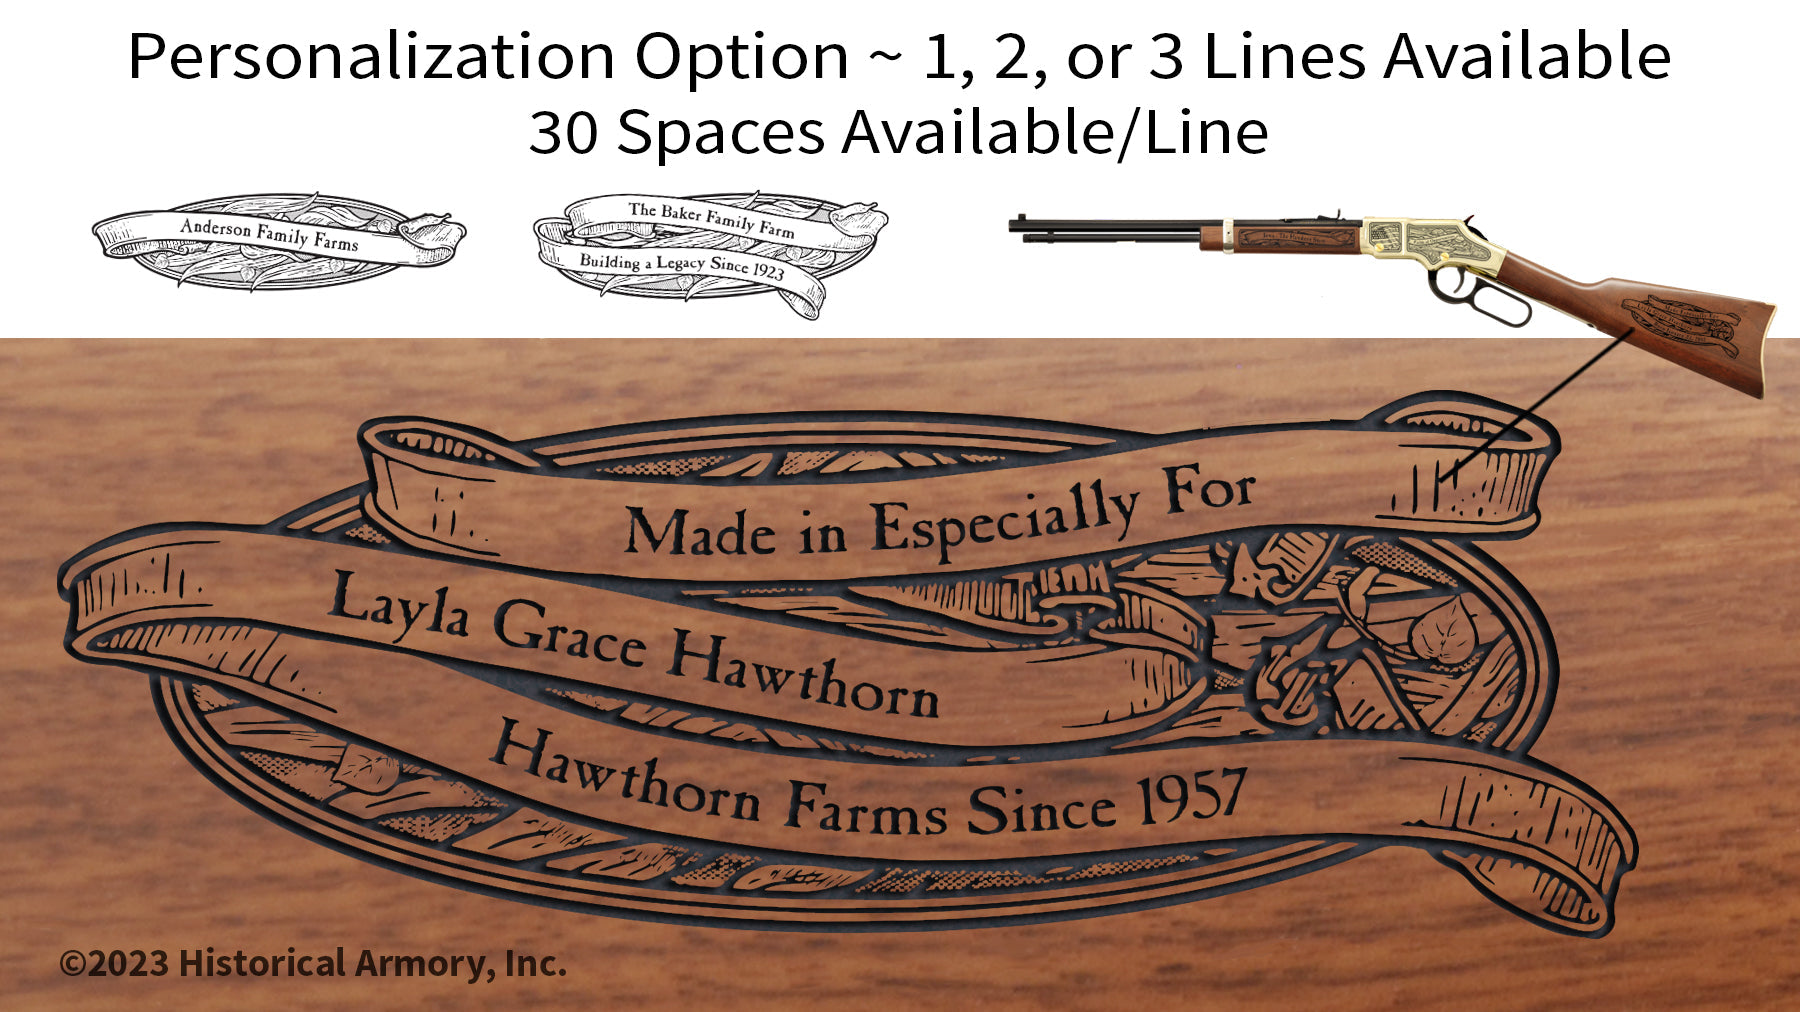 Colorado Agricultural Heritage Engraved Rifle Personalization